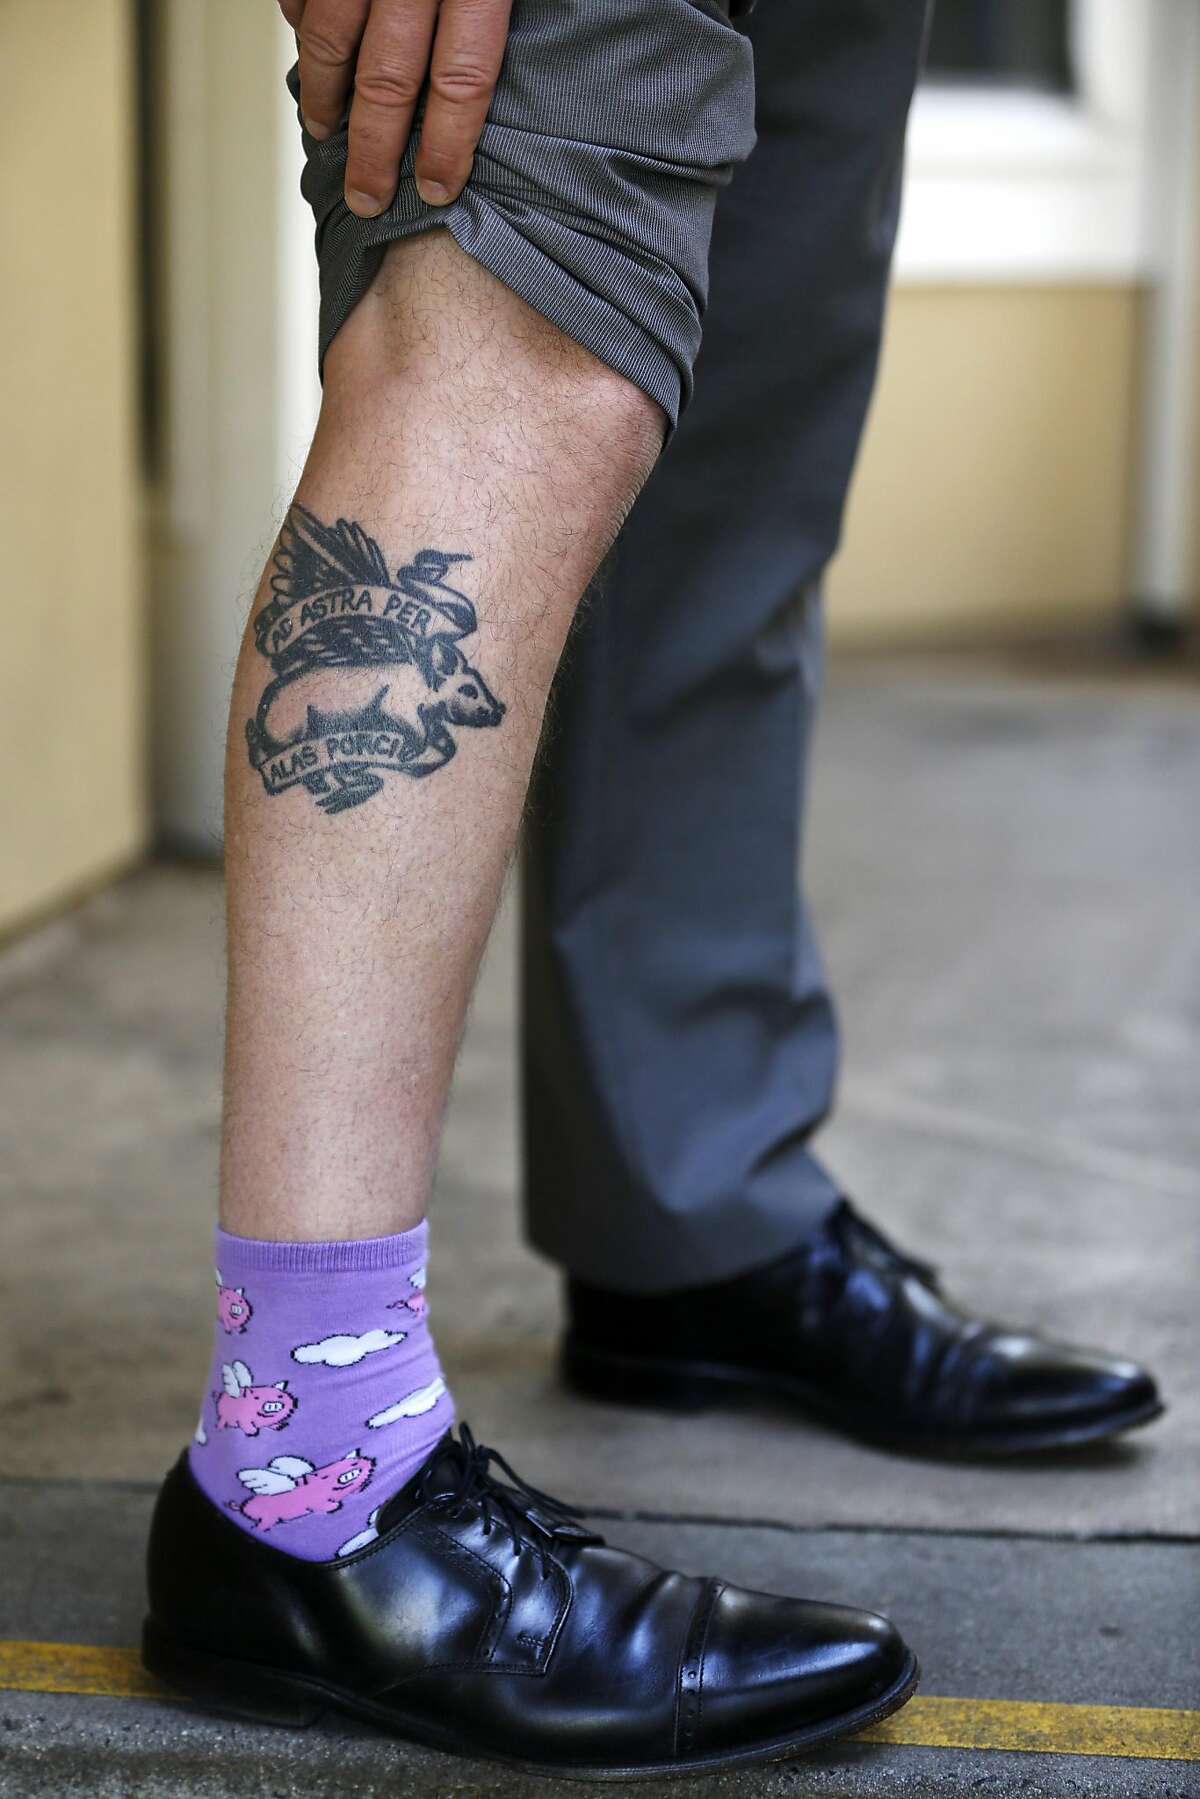 Jeff Kositsky, director of the new Department of Homelessness and Supportive Housing, shows off his flying pig socks and tattoo, which reads "to the stars on the wings of a pig," in San Francisco, California, on Wednesday, May 11, 2016.